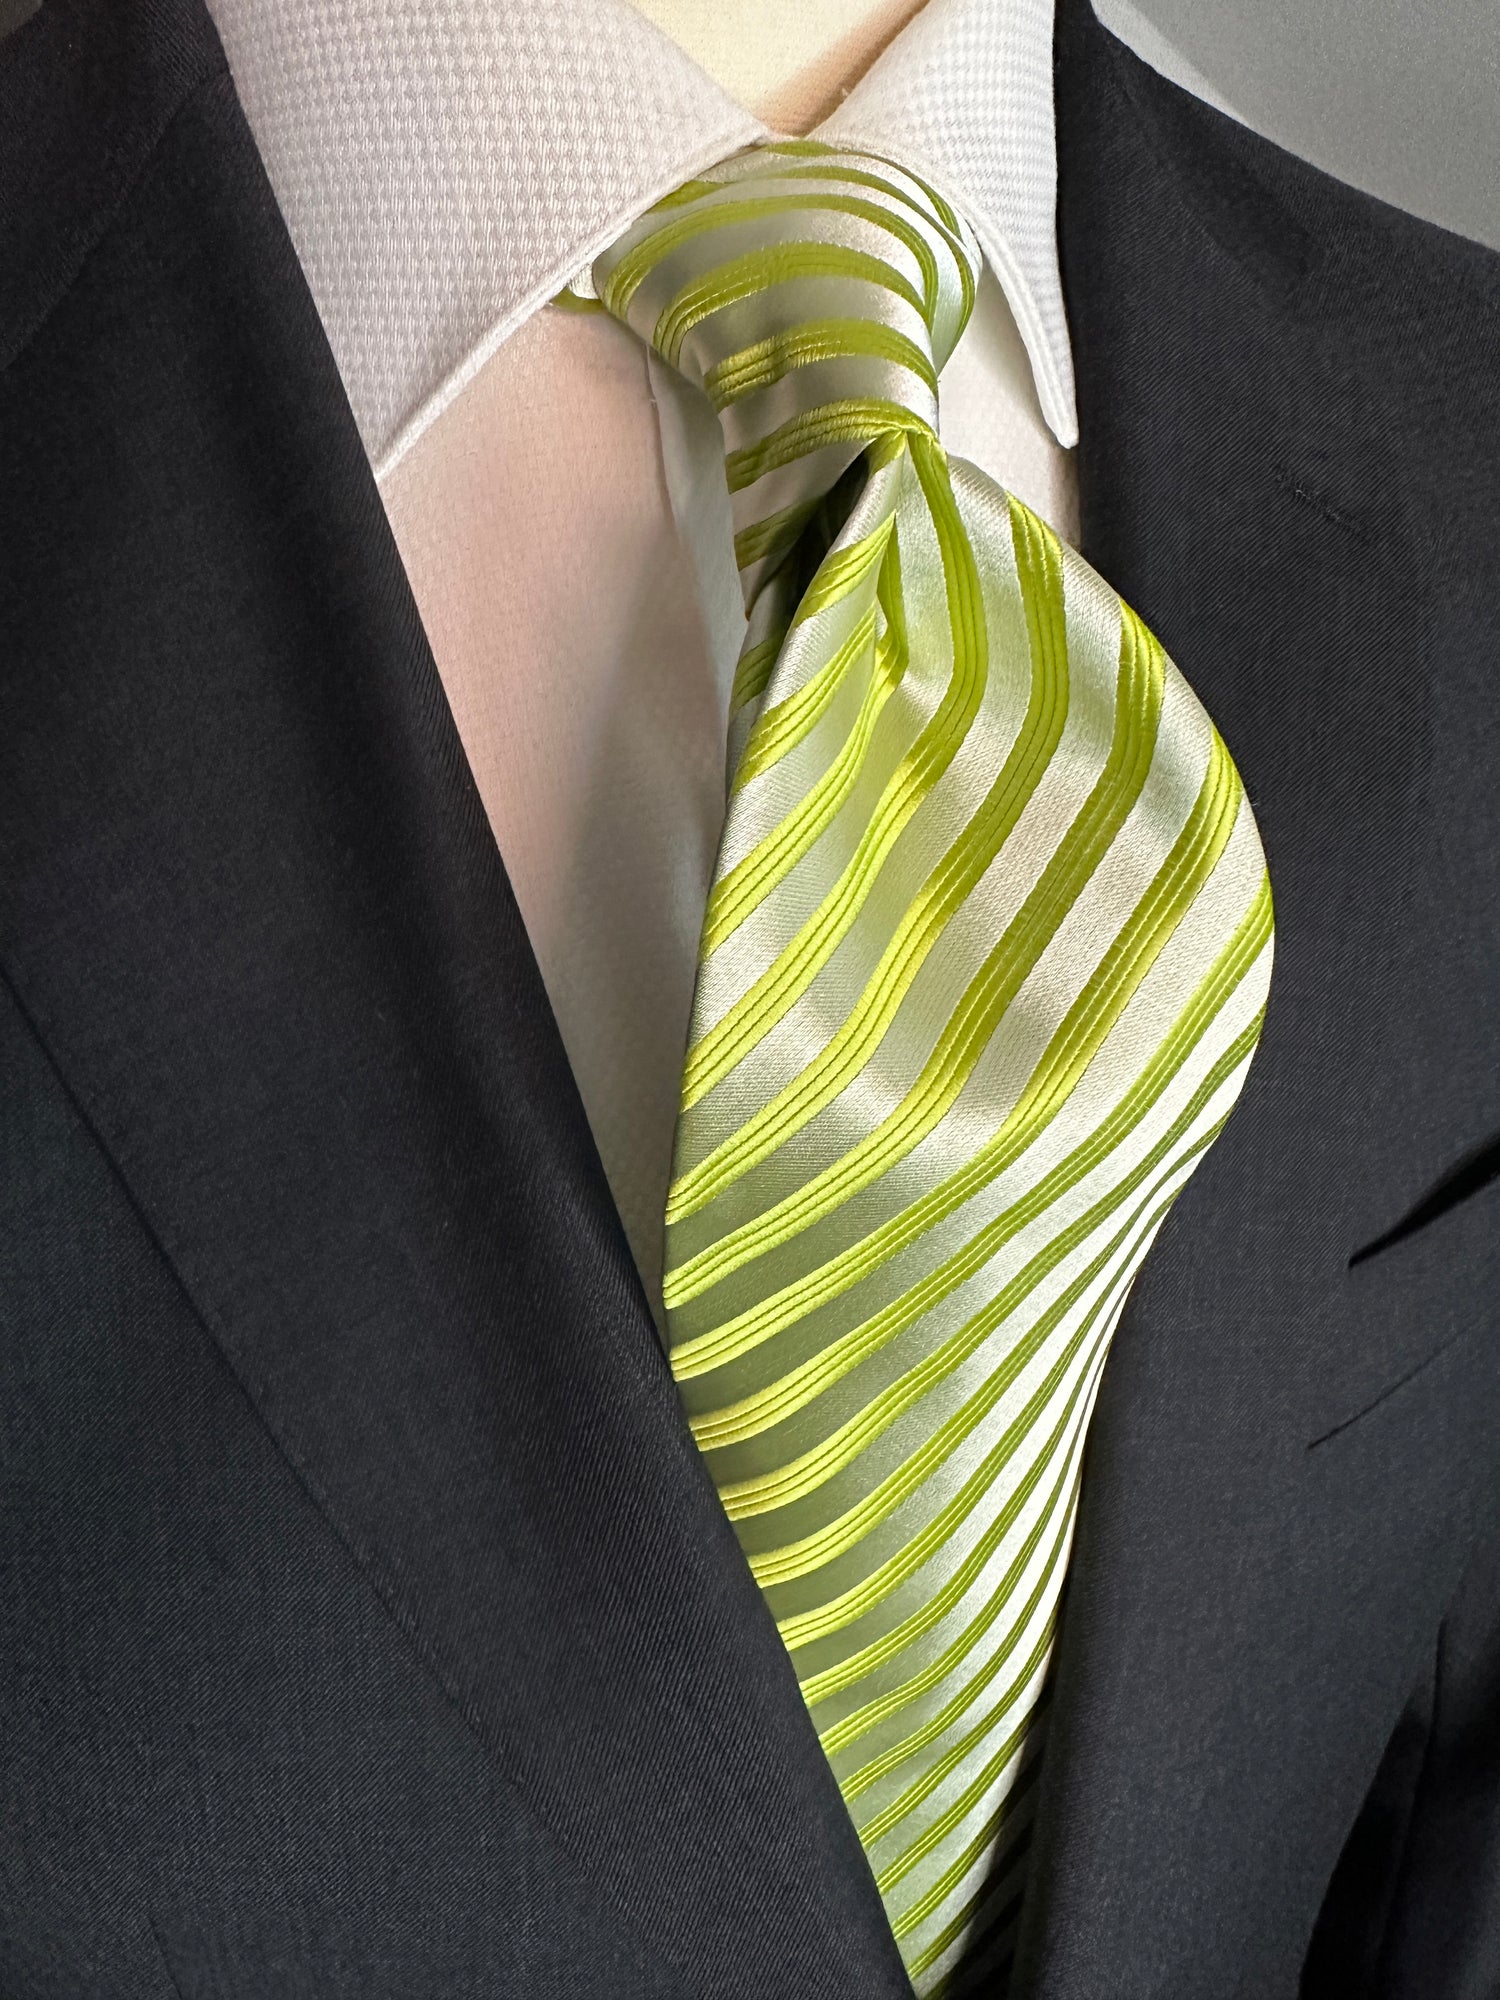 This stunning woven silk in lime green and pale green narrow striped tie. The woven silk fabric adds a luxurious texture and gives the tie an alluring sheen. The narrow stripes, delicately woven with precision, add depth and complexity to the design. The bright lime green color, complemented by the pale green stripes, is the perfect way to add a pop of color to your outfit. This tie is an absolute must-have for any fashion-forward individual who appreciates quality craftsmanship and timeless style.